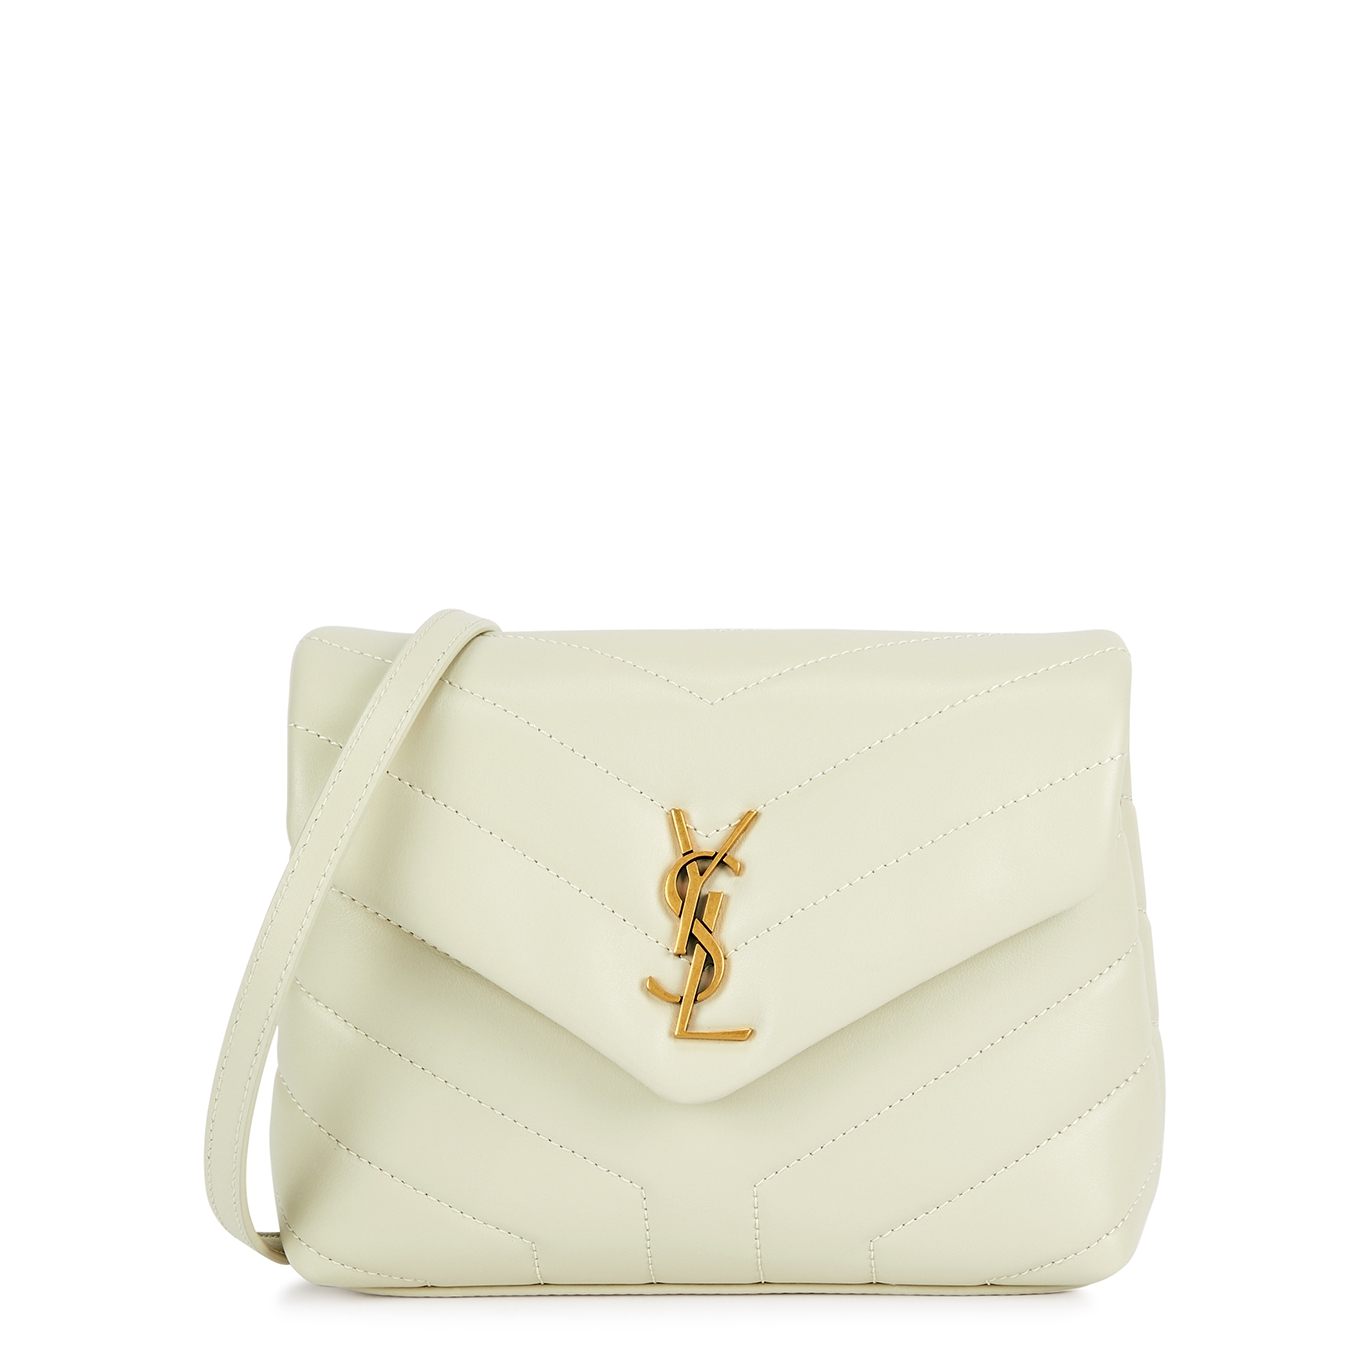 Saint Laurent Loulou Toy Leather Cross-body Bag, Bag, White - Silver